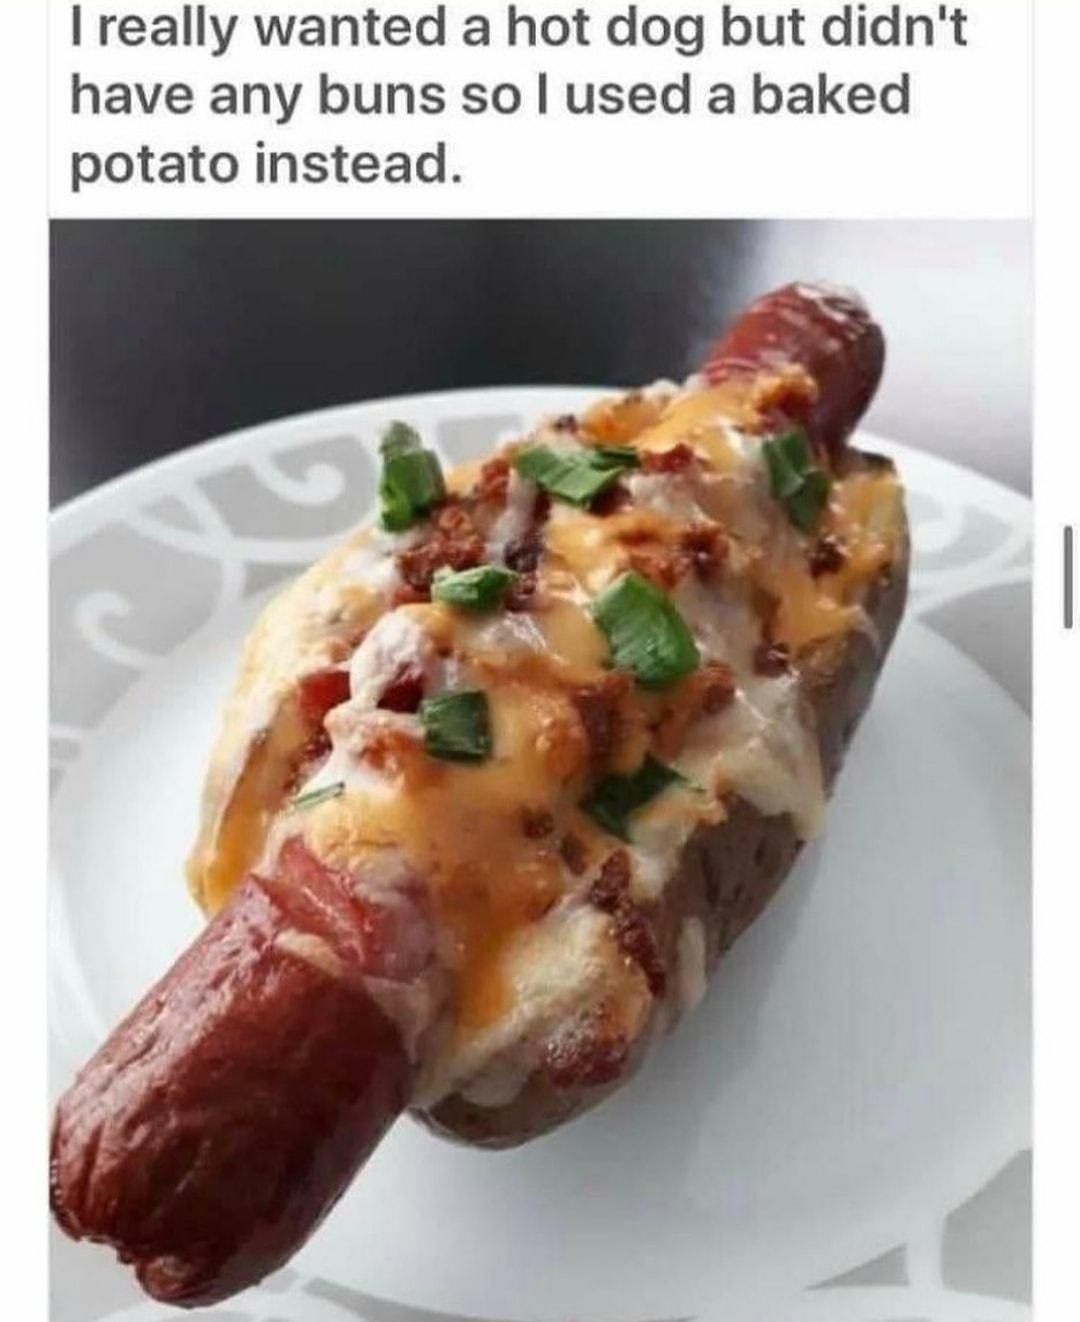 funny memes - food - I really wanted a hot dog but didn't have any buns so I used a baked potato instead.